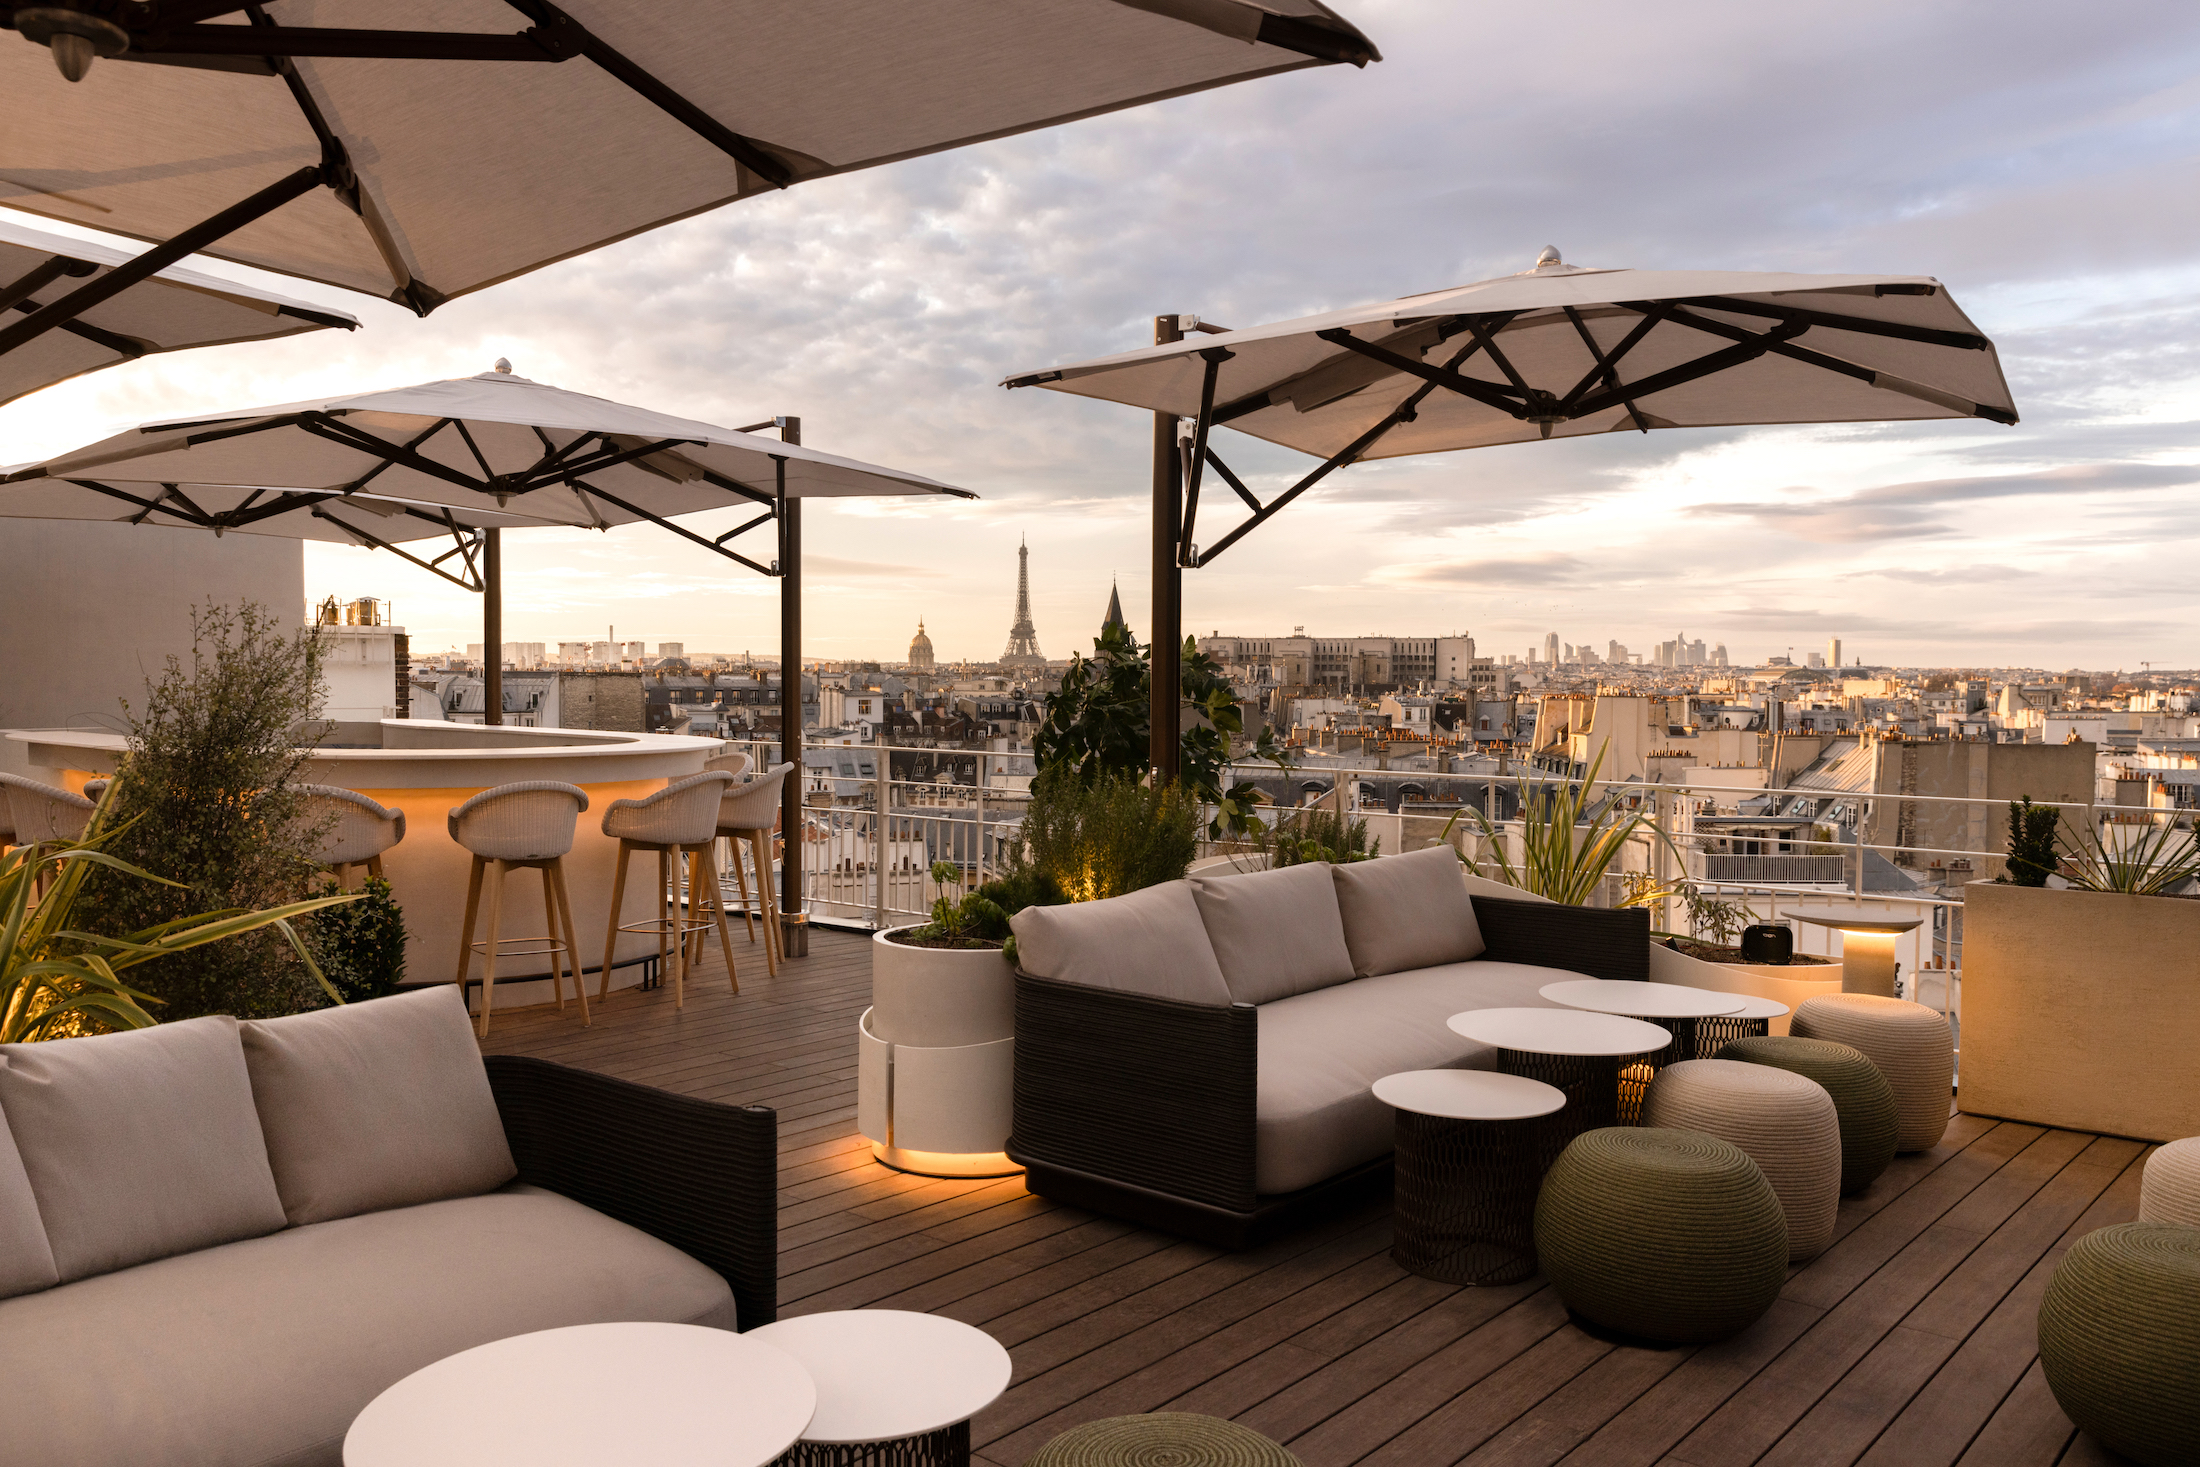 The Hotel Bringing Contemporary Flair To The Oldest District In Paris